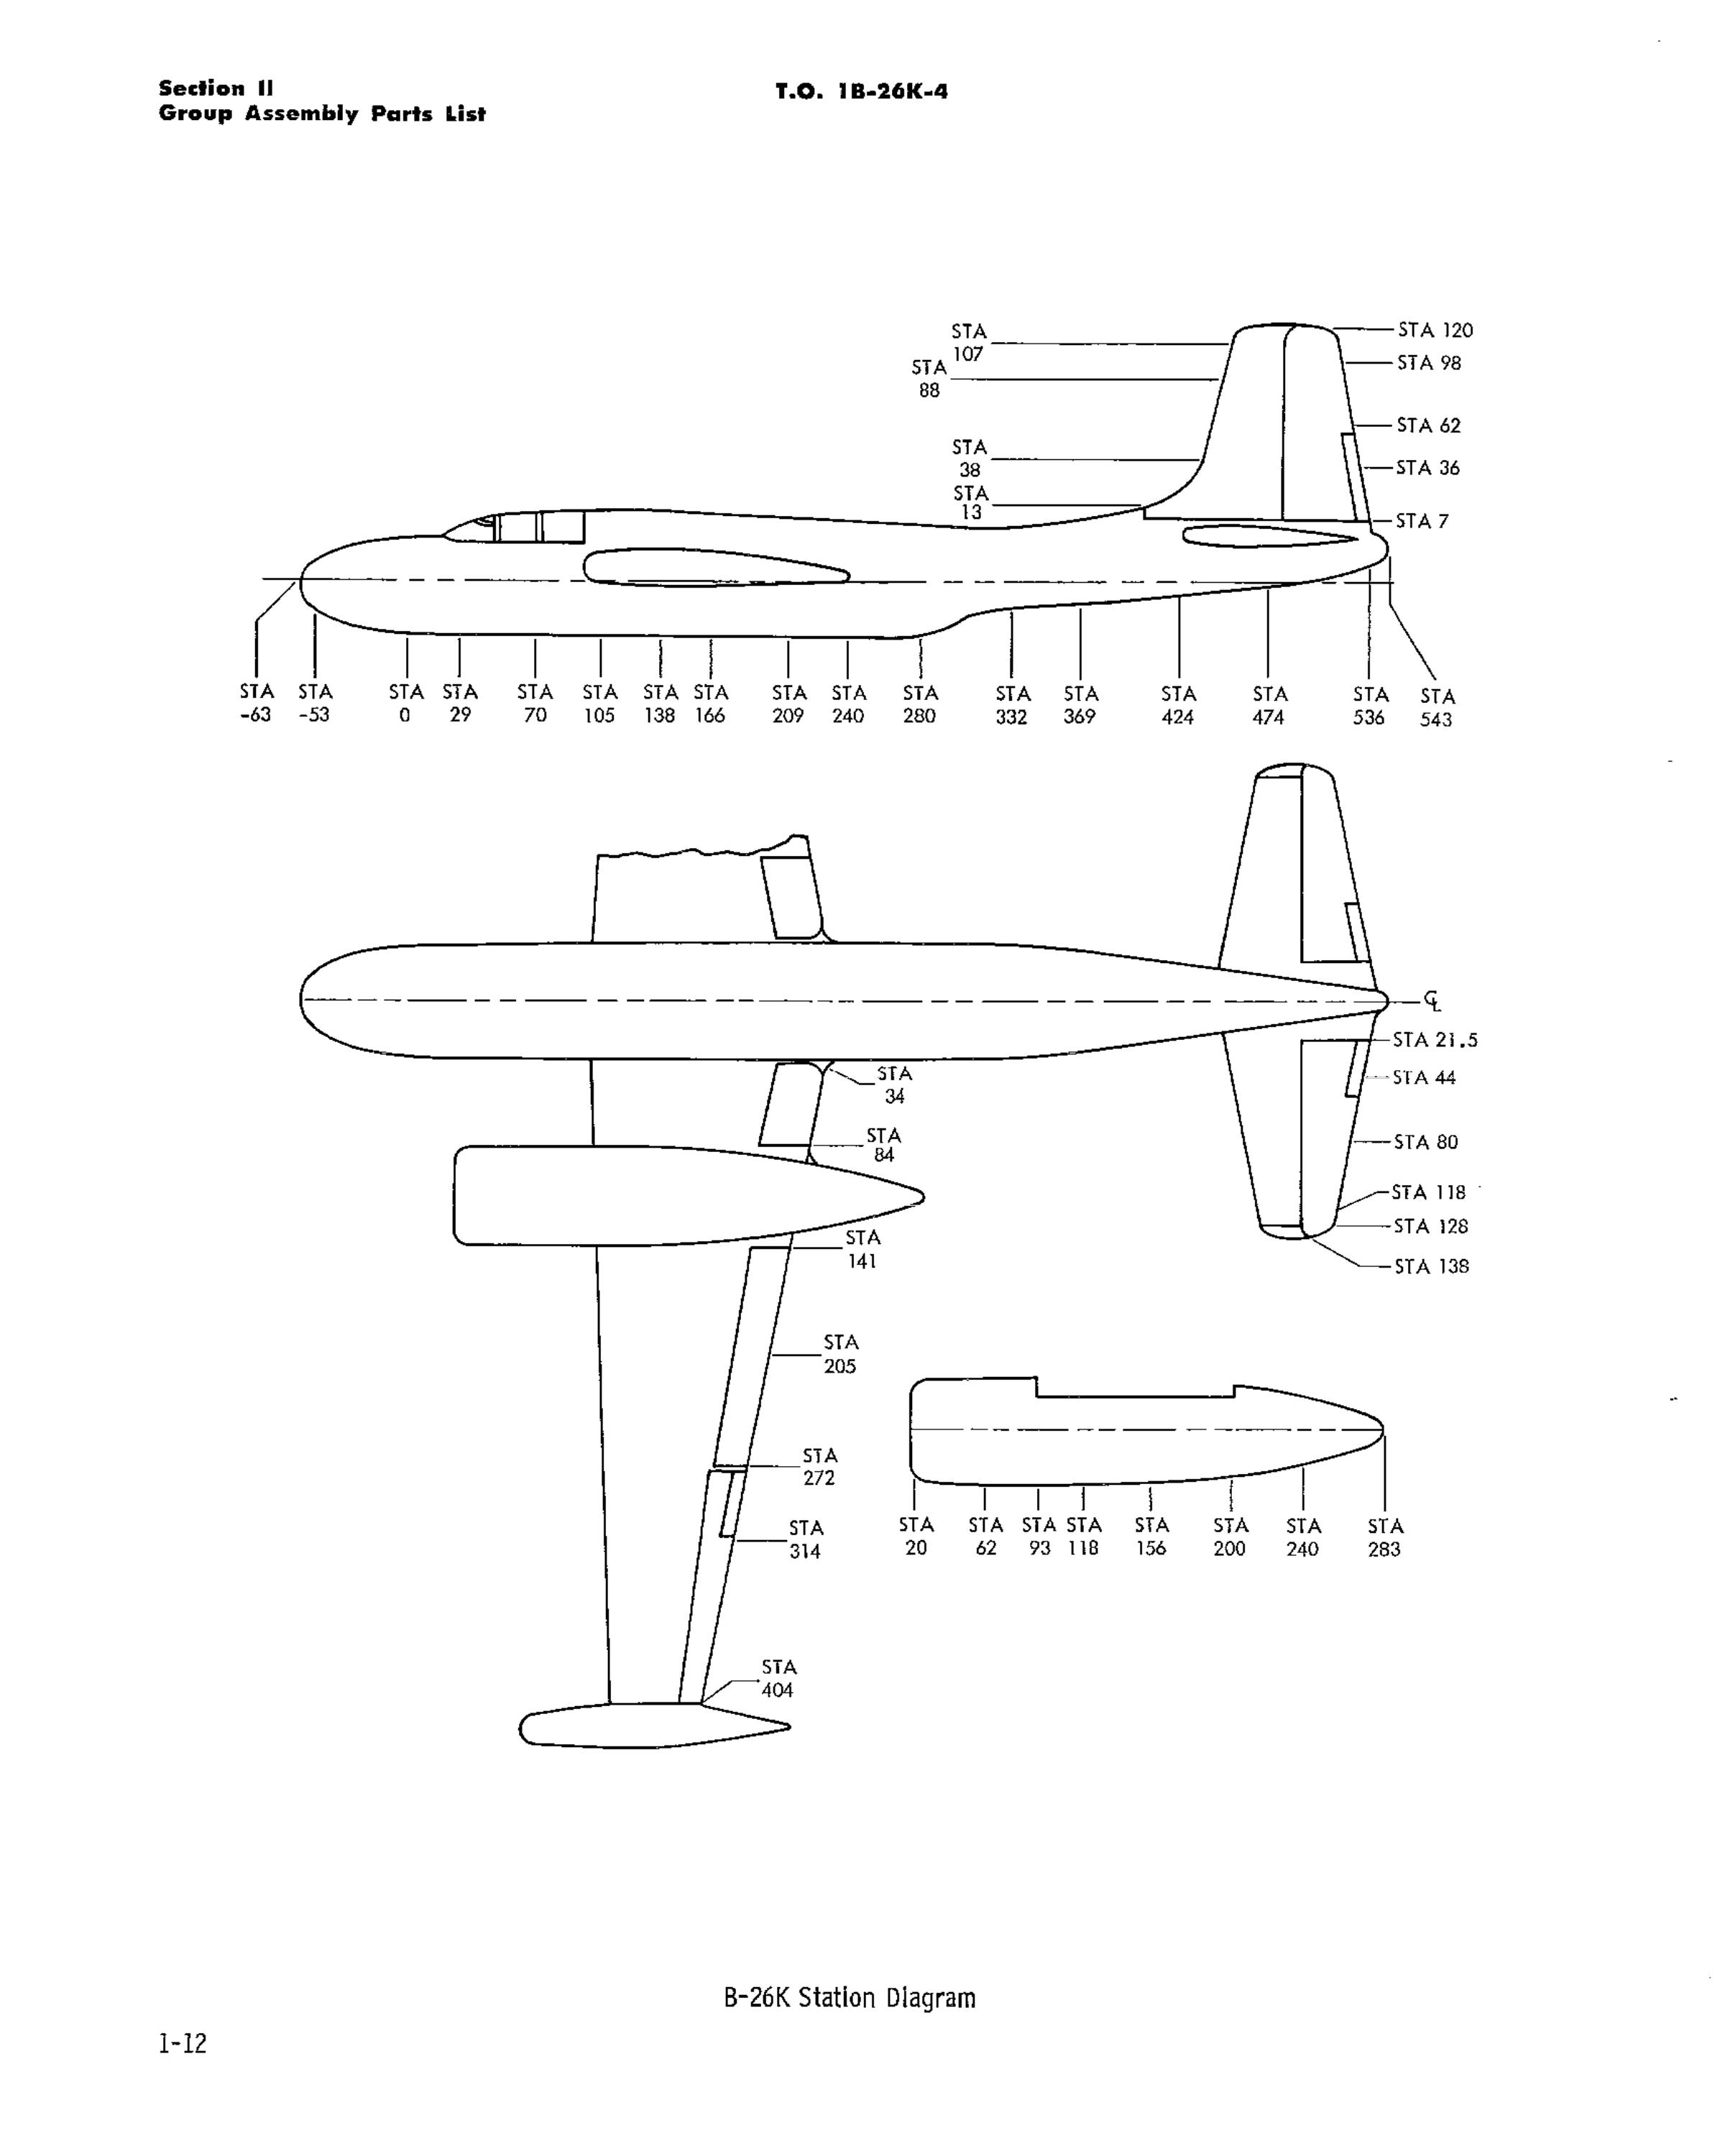 Sample page 18 from AirCorps Library document: Illustrated Parts Breakdown for B-26K Series Aircraft